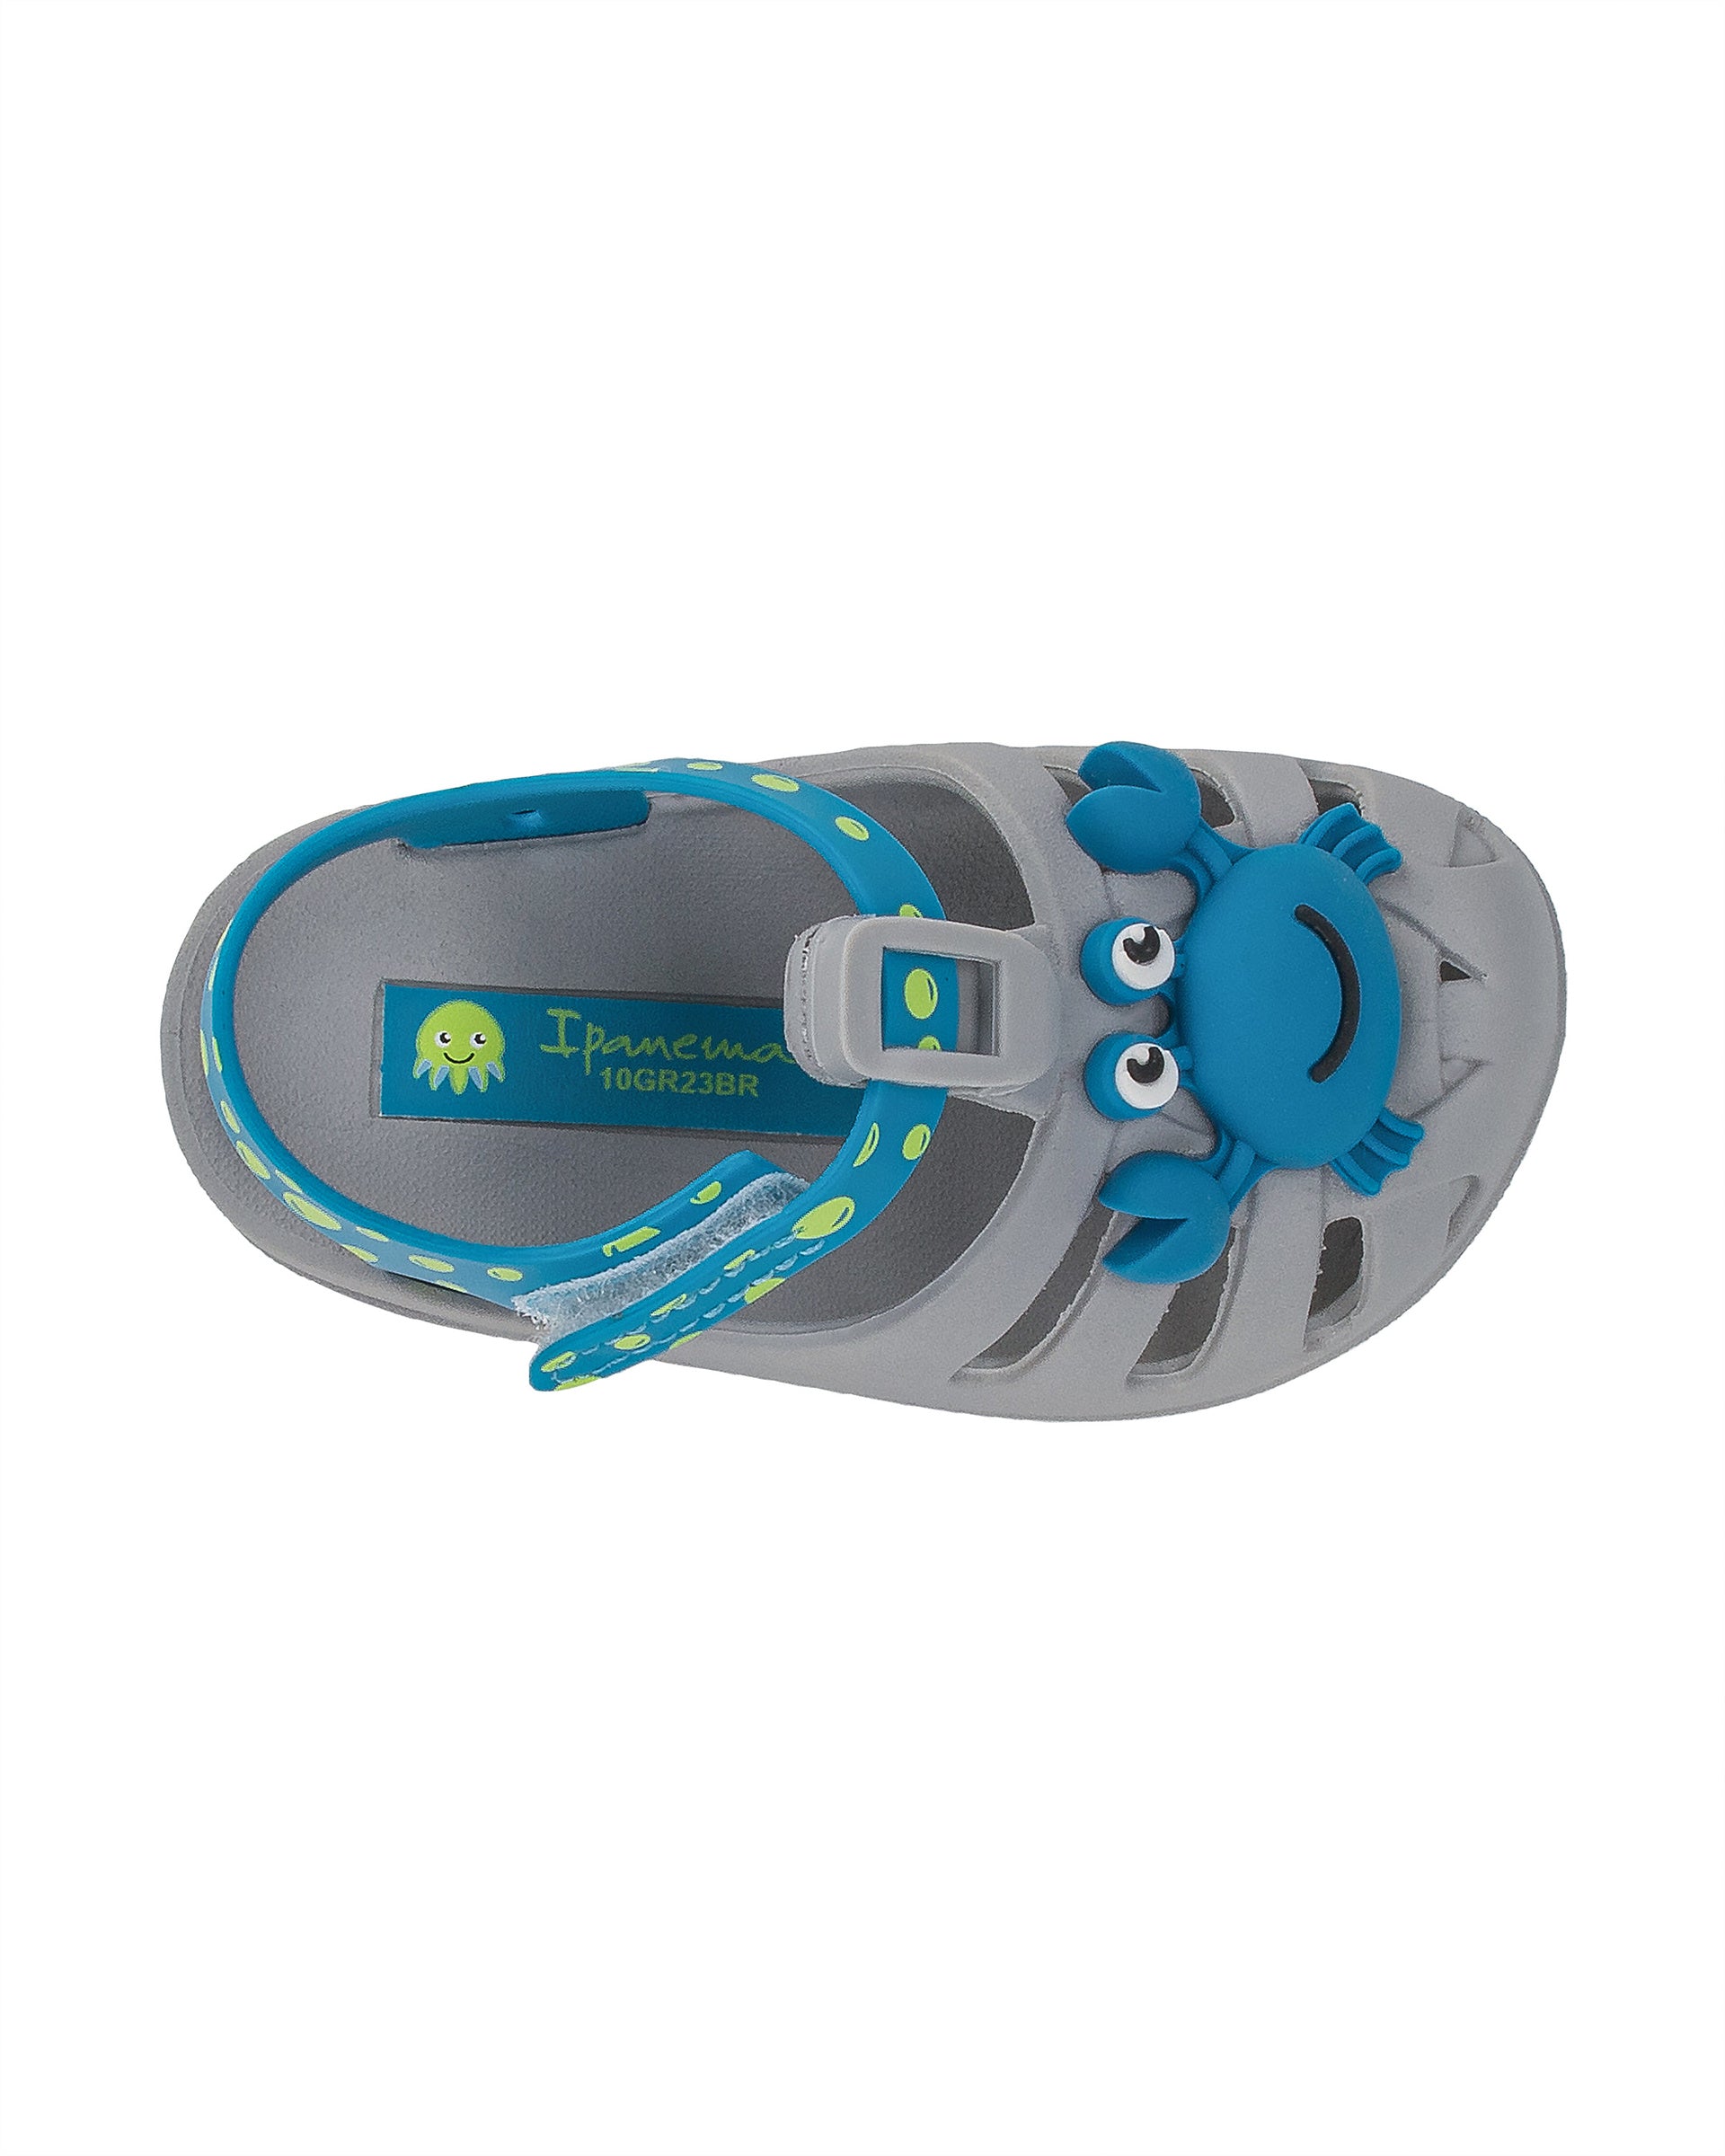 Top view of a grey and blue Ipanema Summer baby fisherman sandal with blue crab on upper and green bubbles on a blue strap.